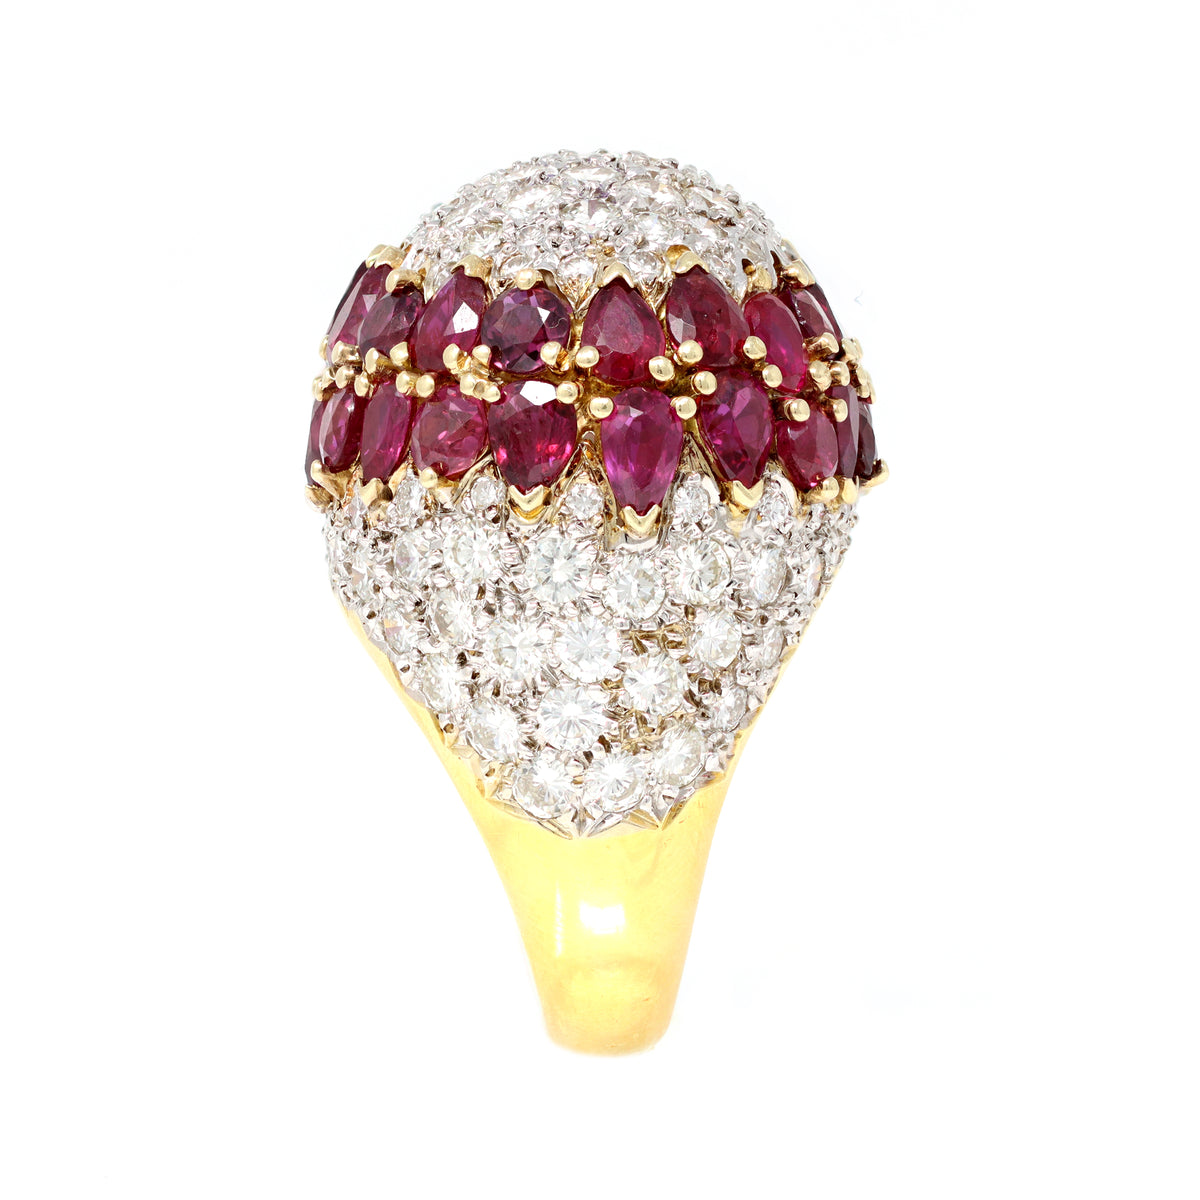 Important Diamond and Ruby Dome Cocktail Ring 18 Karat circa 1970 side view